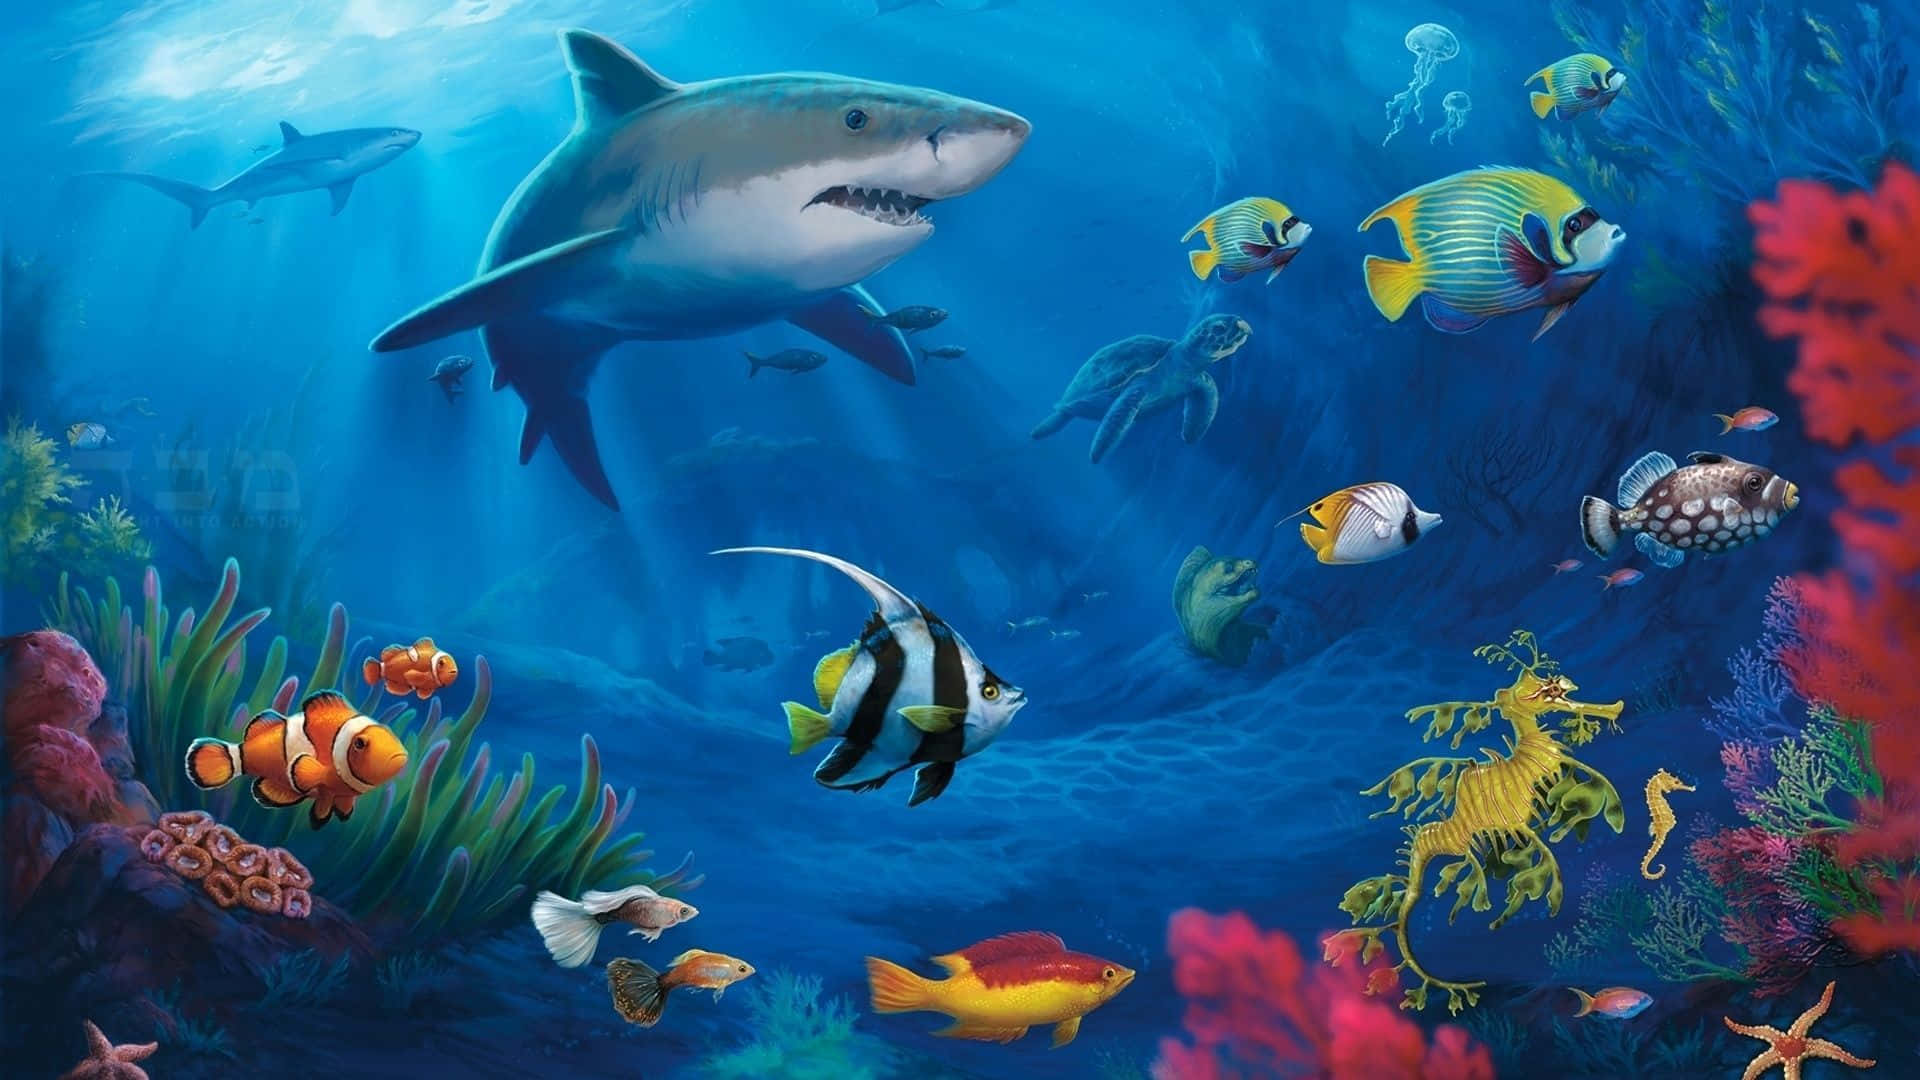 Live Fishes With A Shark Underwater Wallpaper